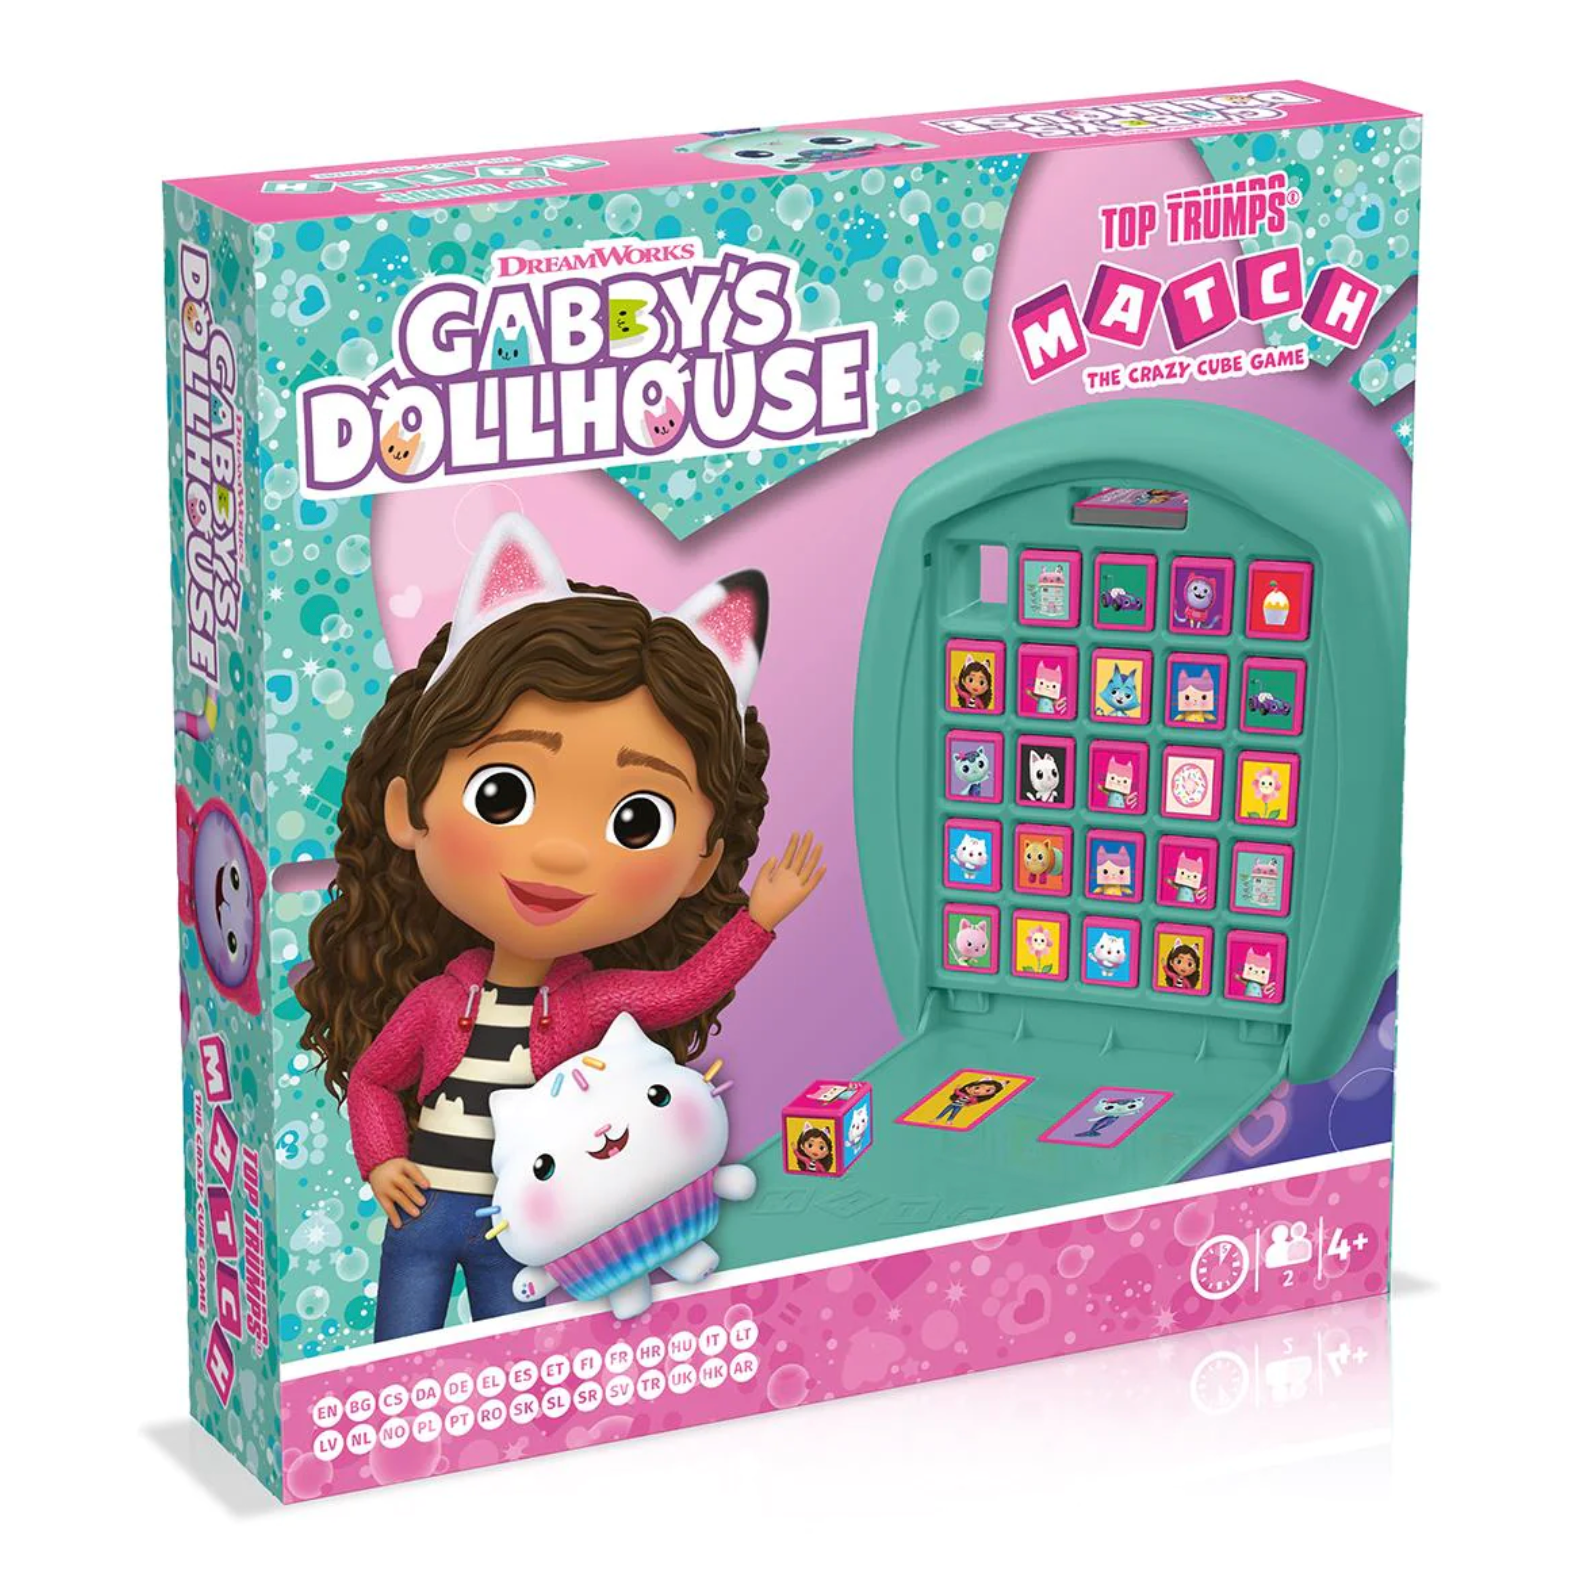 Gabby’s Dollhouse Top Trumps Match - The Crazy Cube Game